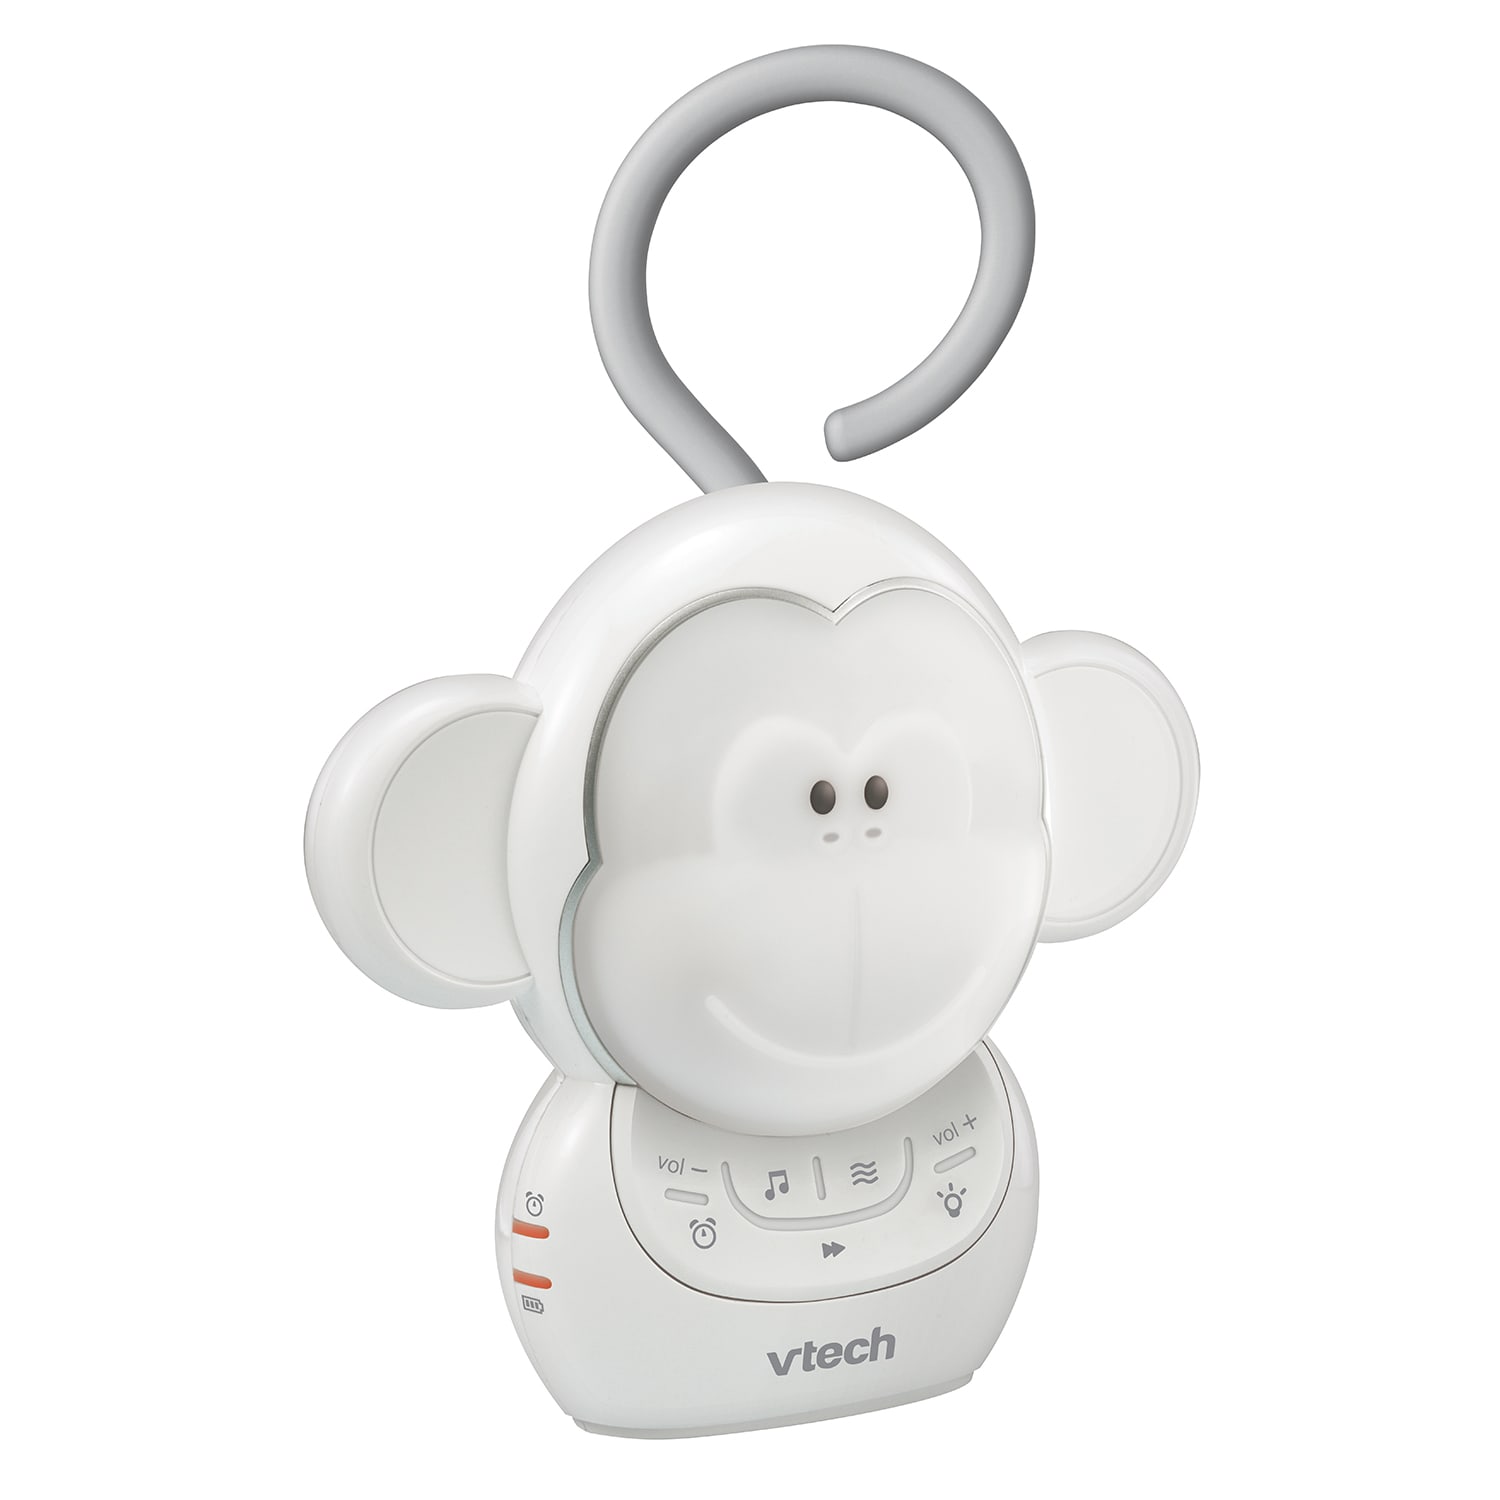 Myla the Monkey® Portable Soother - view 10